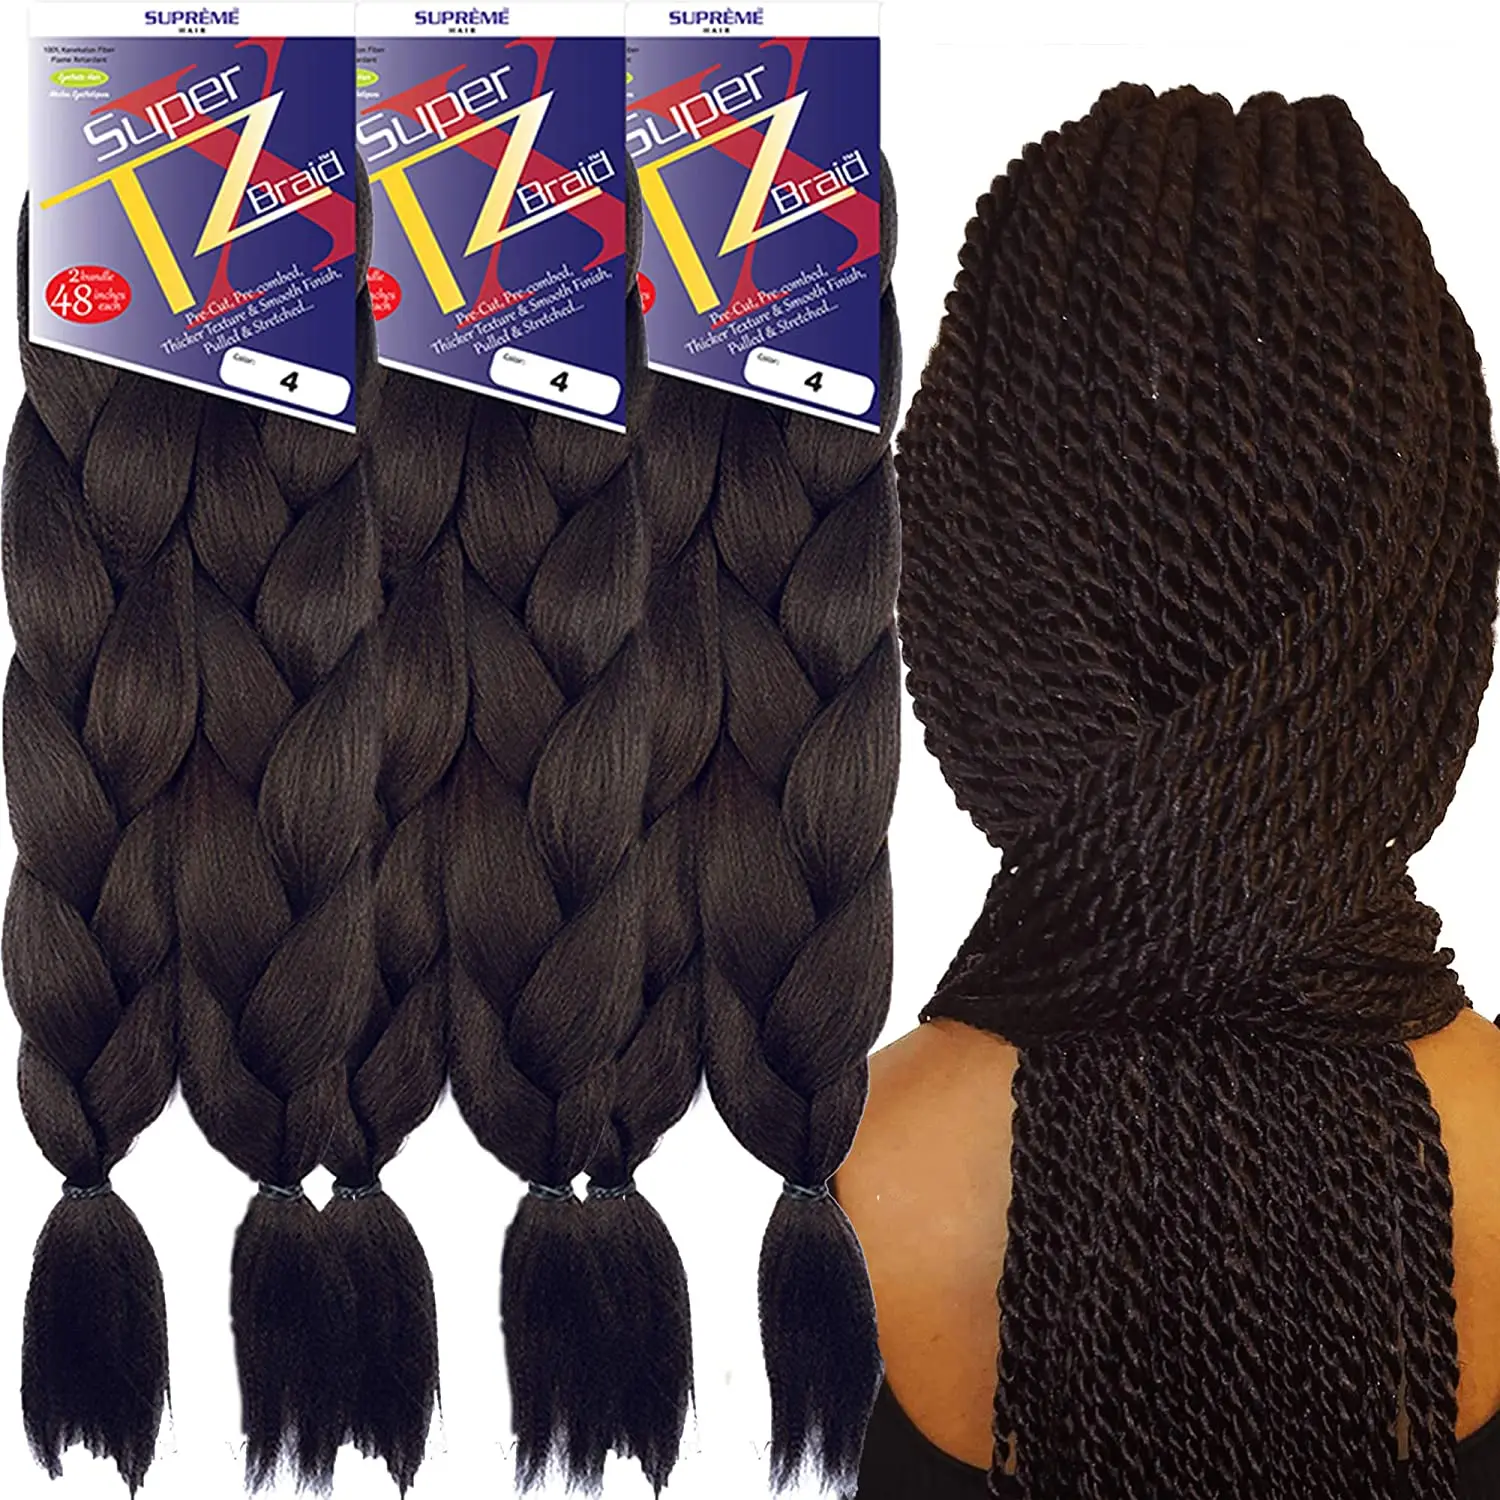 

Wholesale Crochet Pre Stretched Heat Resistant Synthetic hair Jumbo Braiding Hair 165g 82 Inches Pure Color Extension